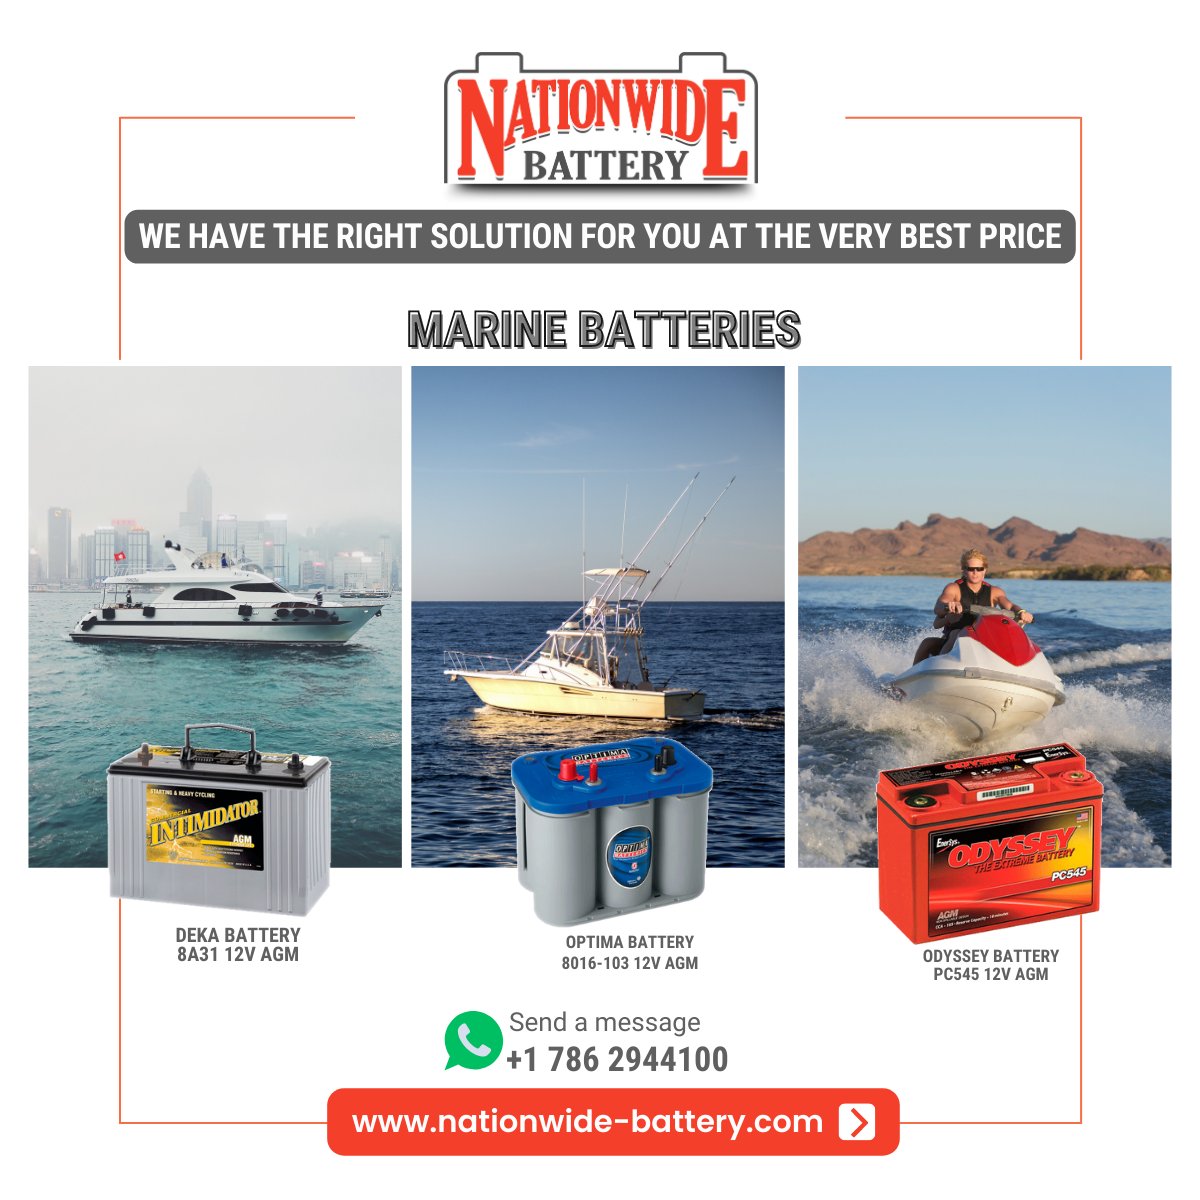 No matter if you have a #Yacht , small outboard engine boat or a #jetski, you will find the best marine #battery with us.  
Our portfolio will offer the correct battery according to your needings.  Give us a call📞 +1-954-527-4640  

#Dekabatteries #ODYSSEYbattery #Optimabattery